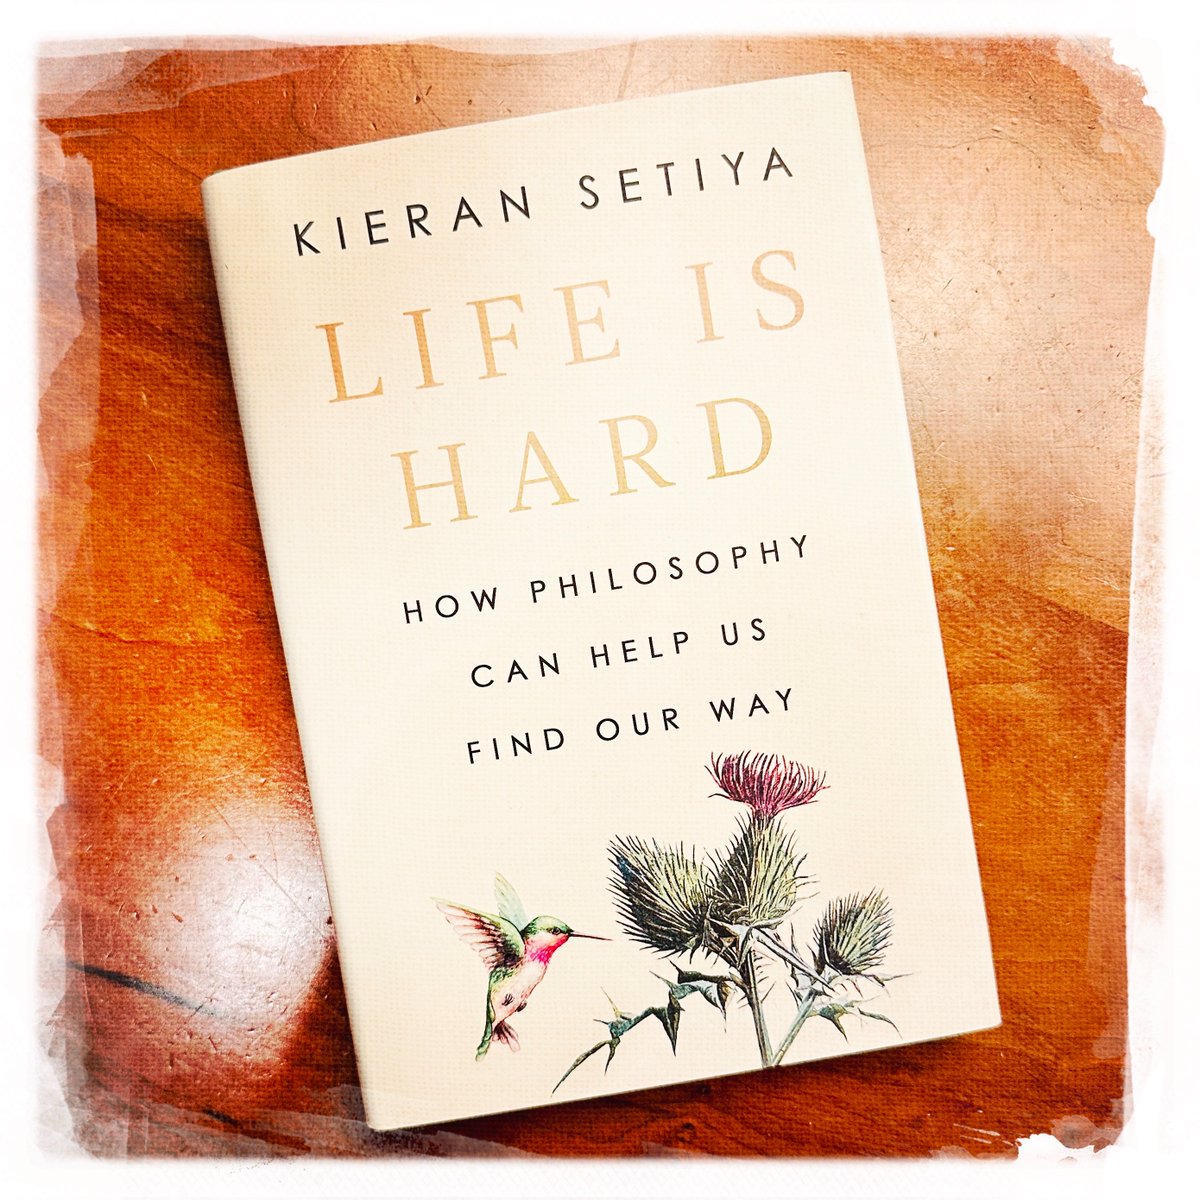 Congrats to @KieranSetiya on the release(soon) of “Life is Hard”…highly recommended! We were lucky to get him back on @reconsider_pod and look forward to sharing that conversation with you next week. In the meantime, you should really check out the book. penguinrandomhouse.com/books/700441/l…